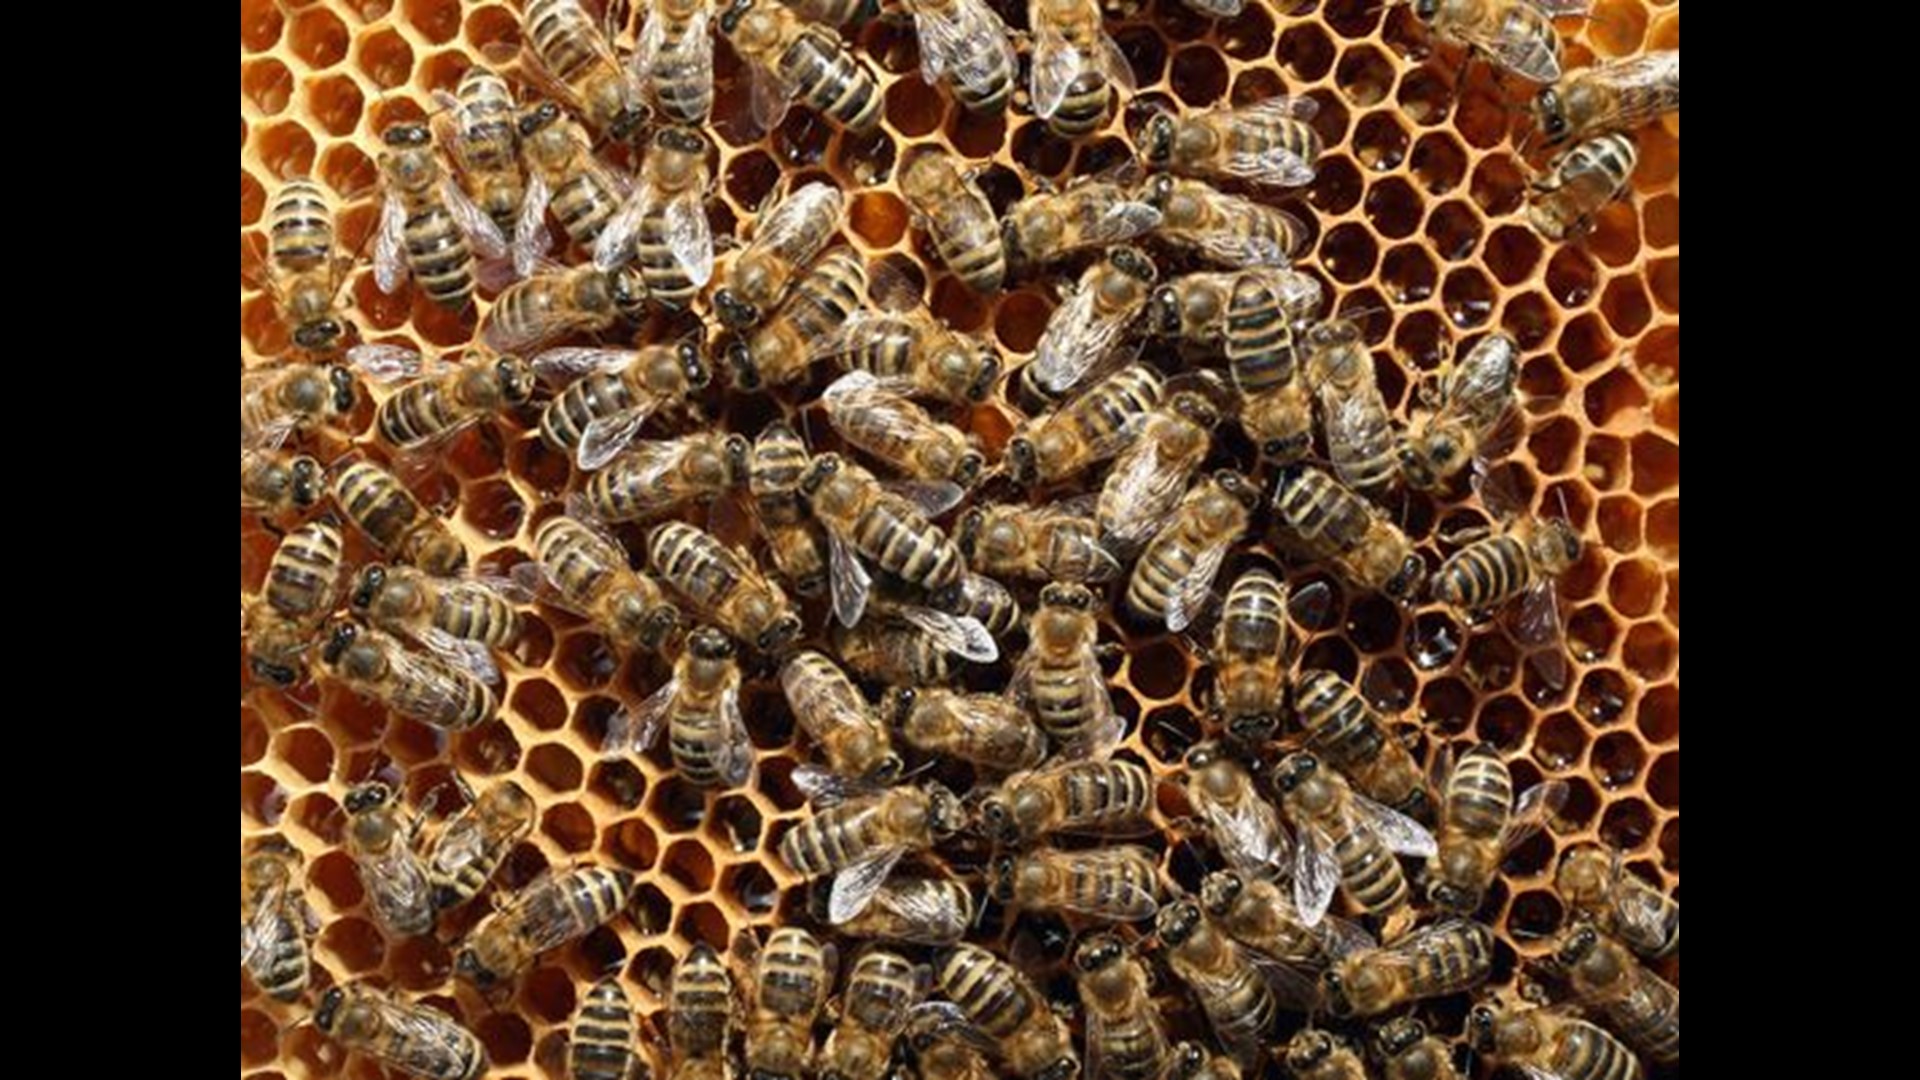 Honeybees gather pollen and help pollination, and researchers with Iowa State University say it's the same for soybeans.